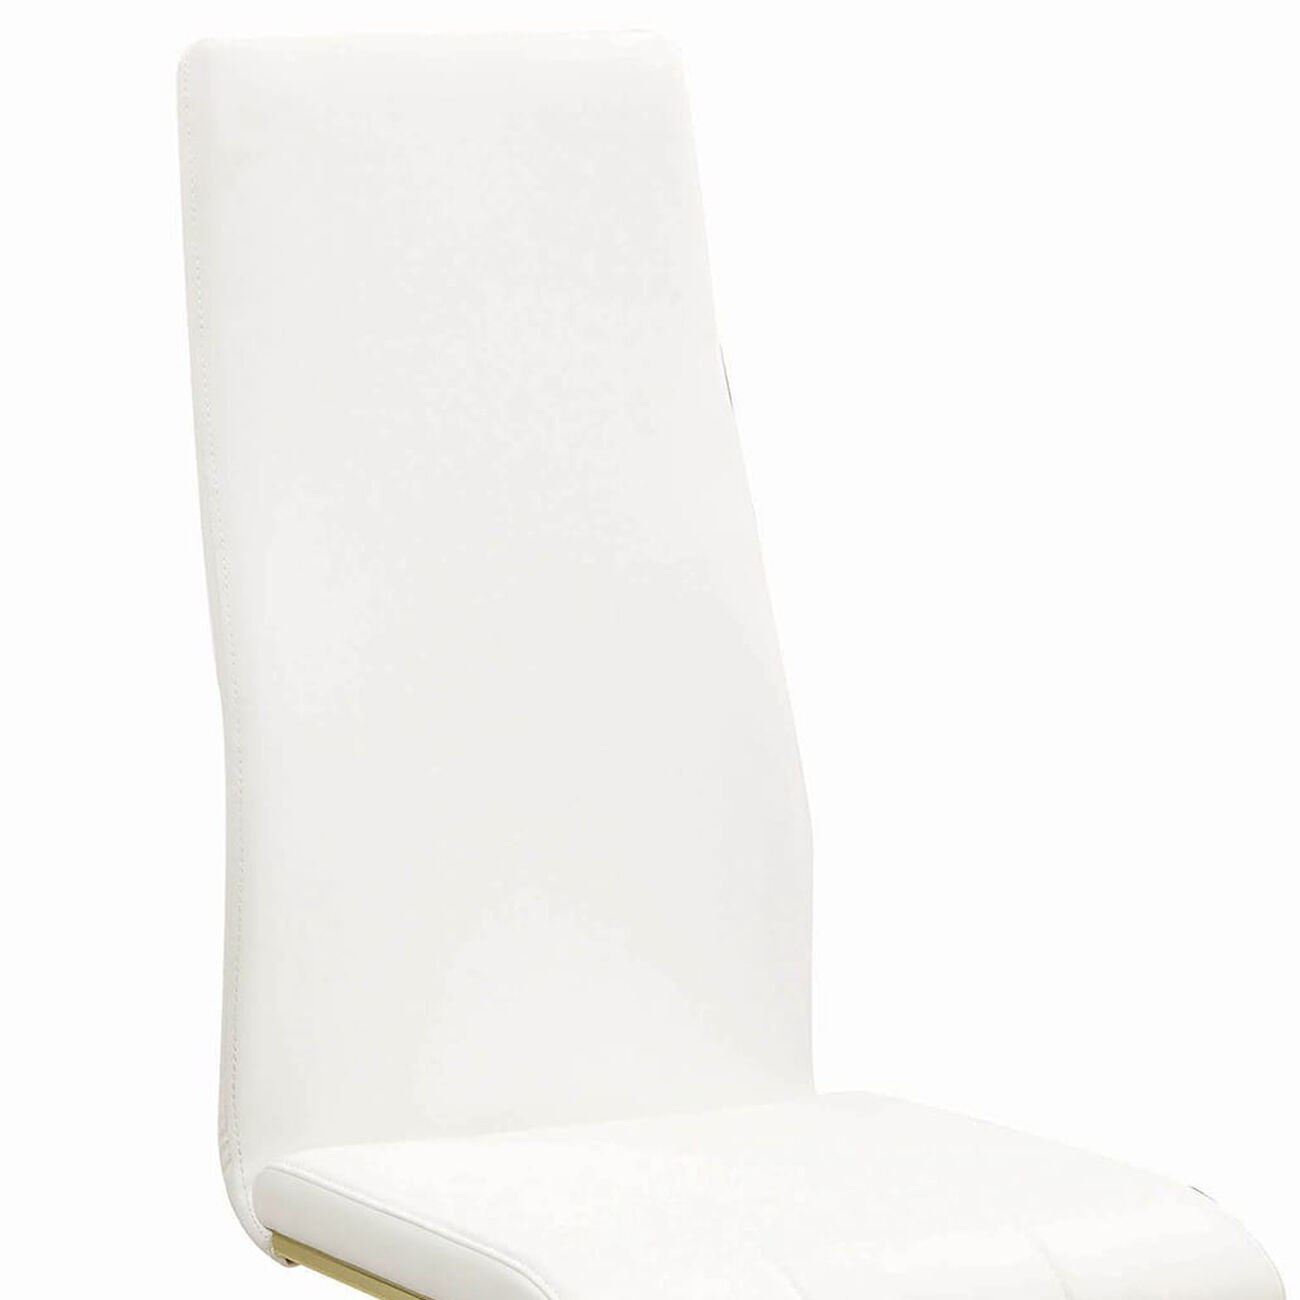 Leatherette Breuer Style Dining Chair, Set of 4, White and Gold